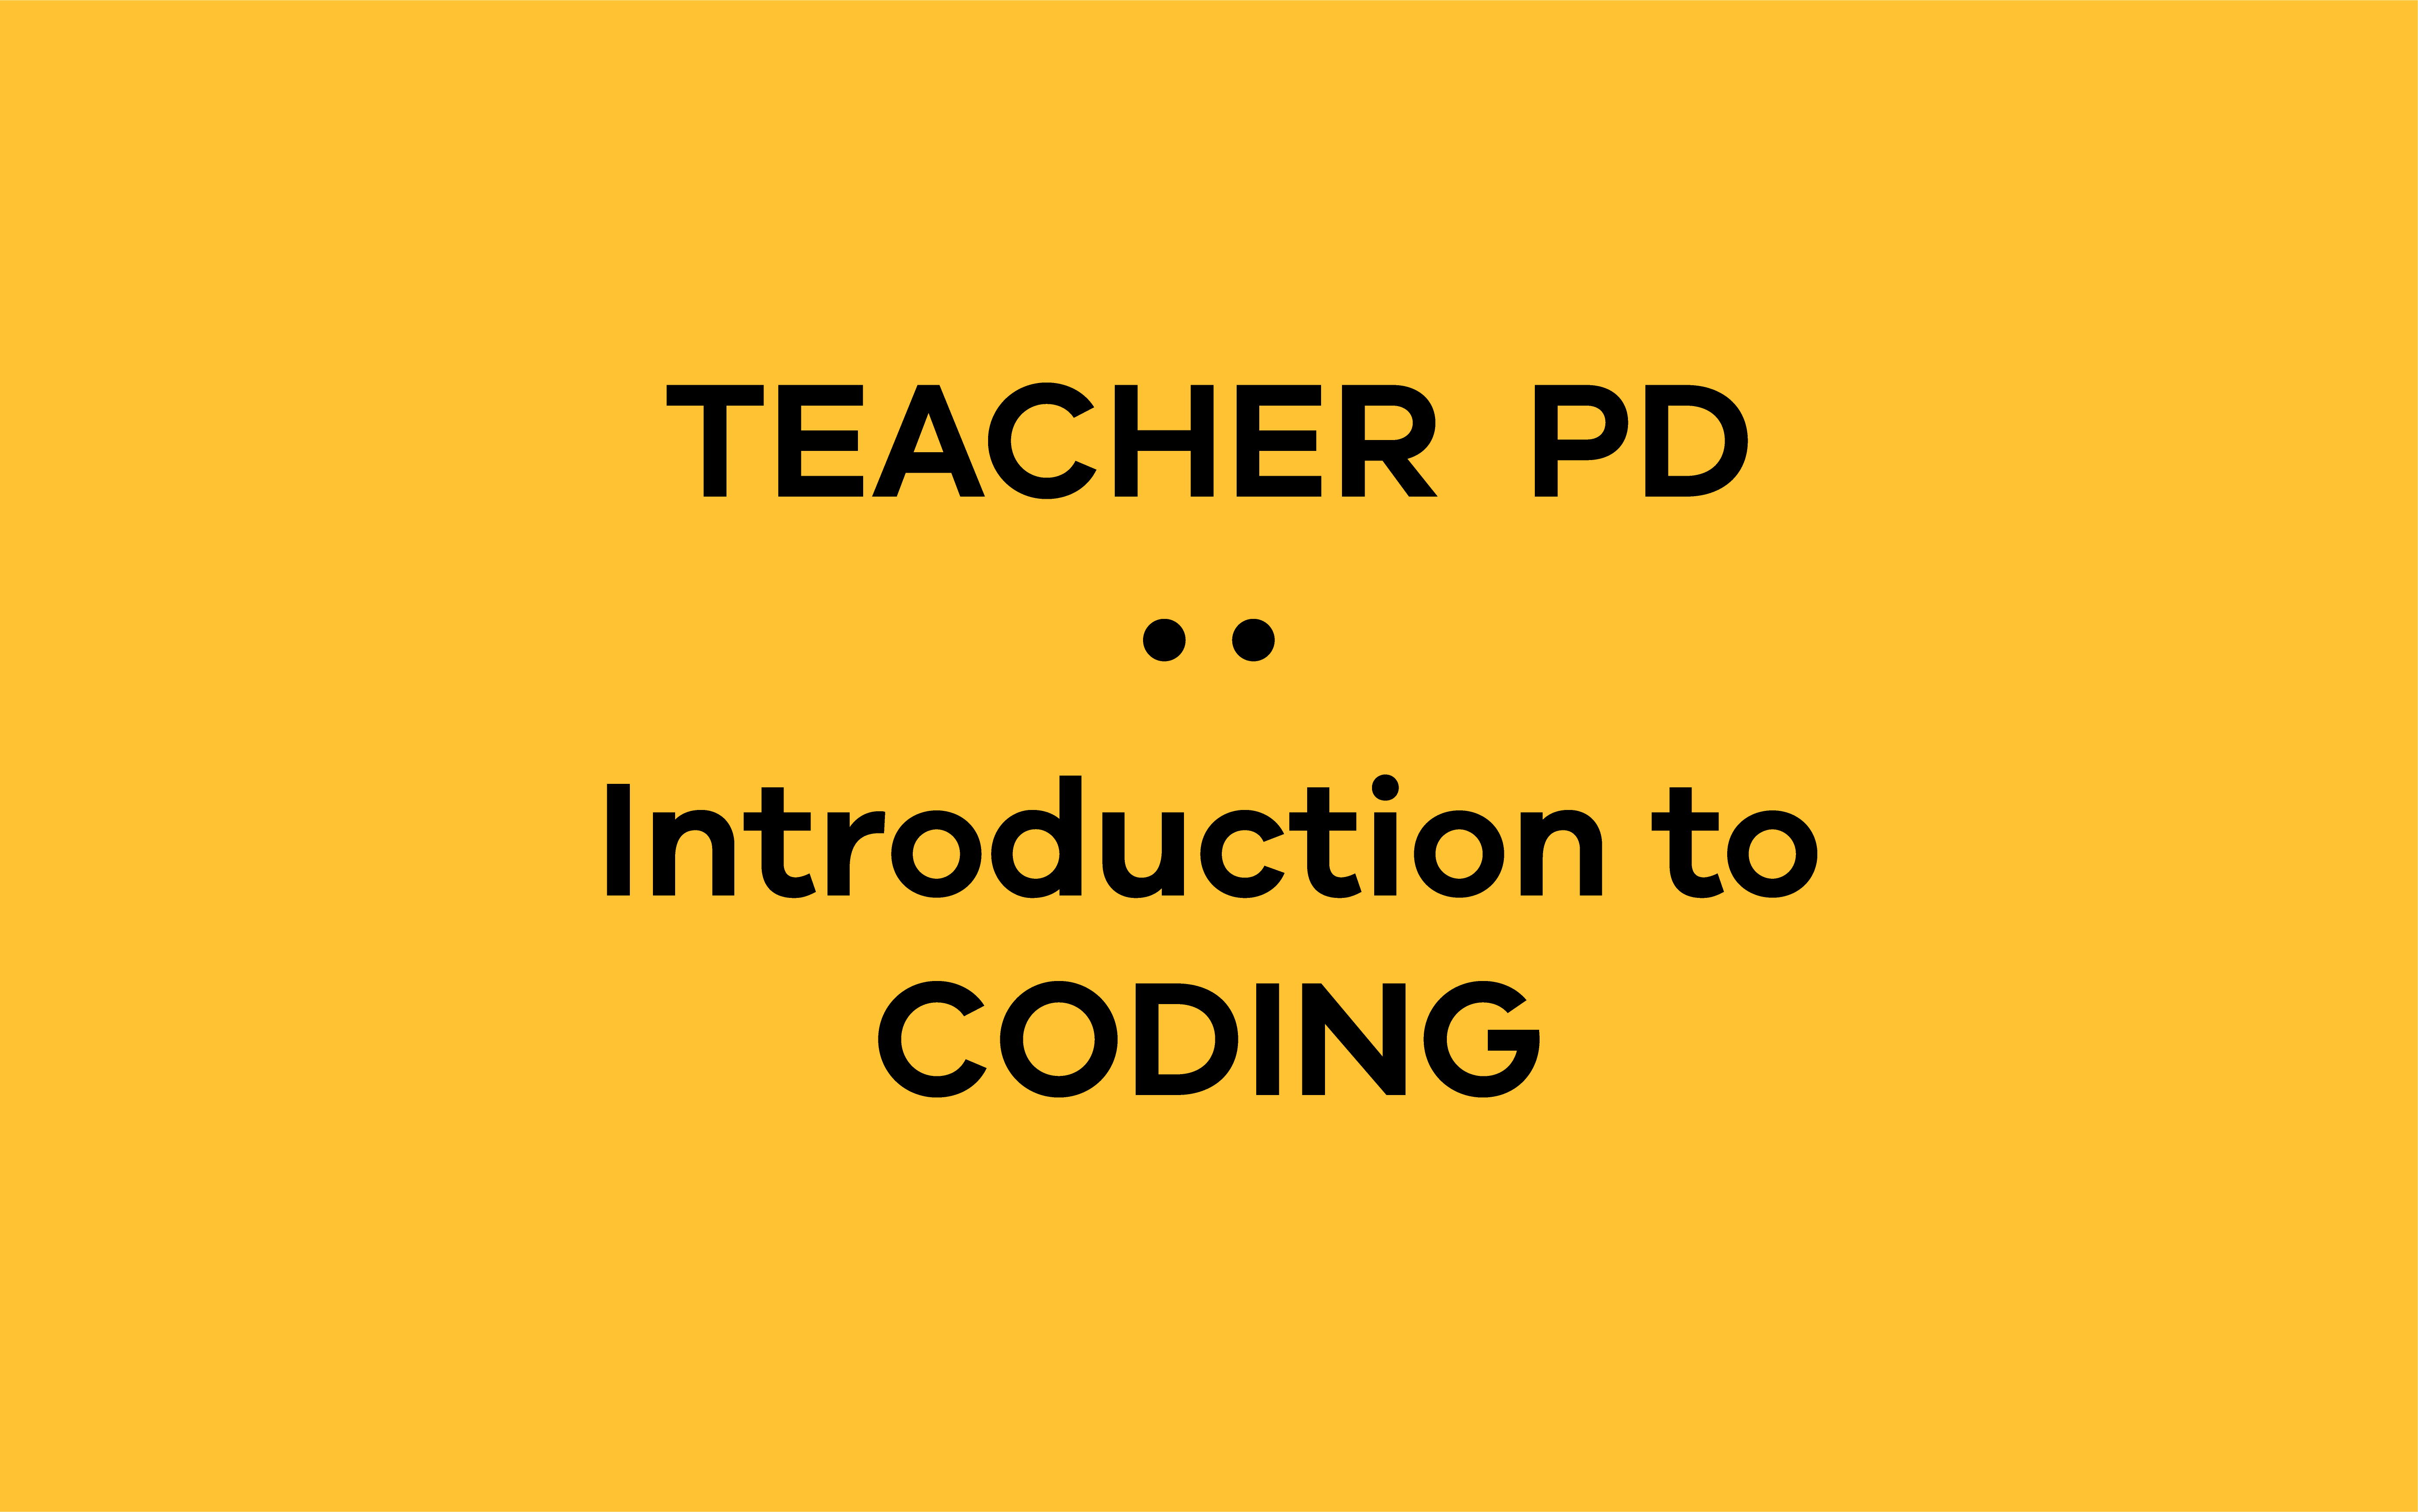 2021 - Introduction to: Coding